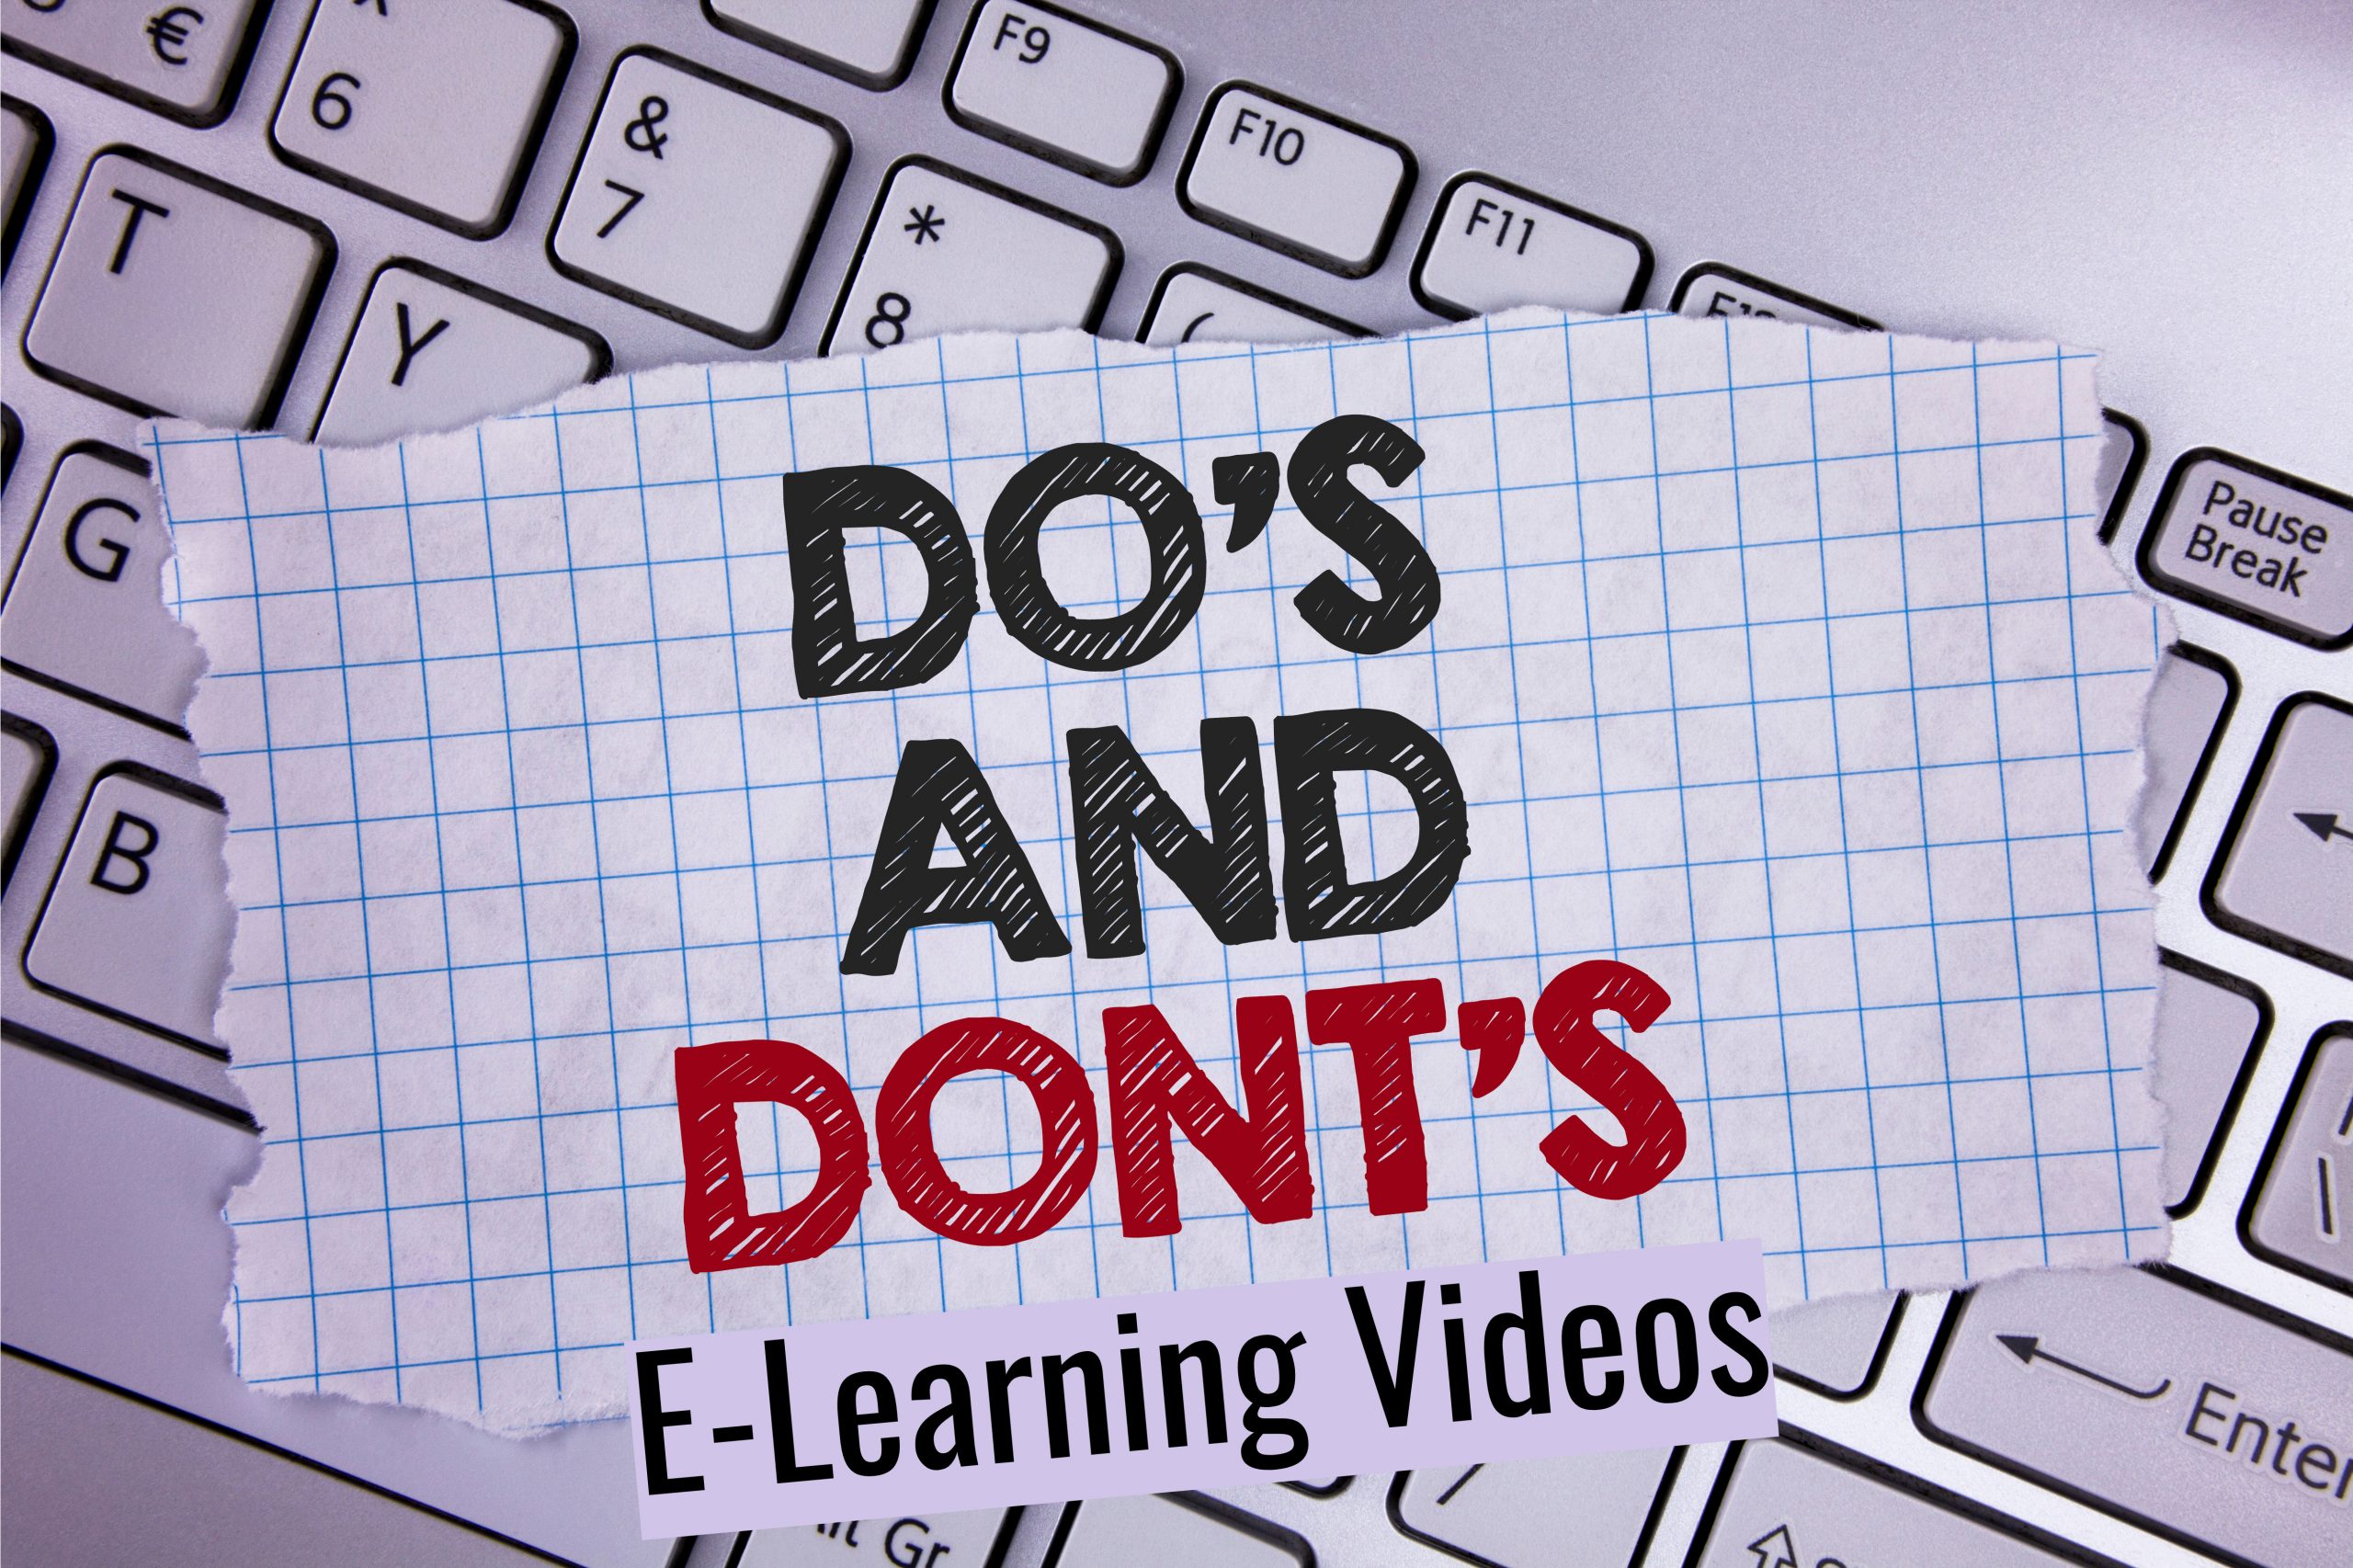 Does and donts. Картинки dos and donts. Do and donts. Email Etiquette.